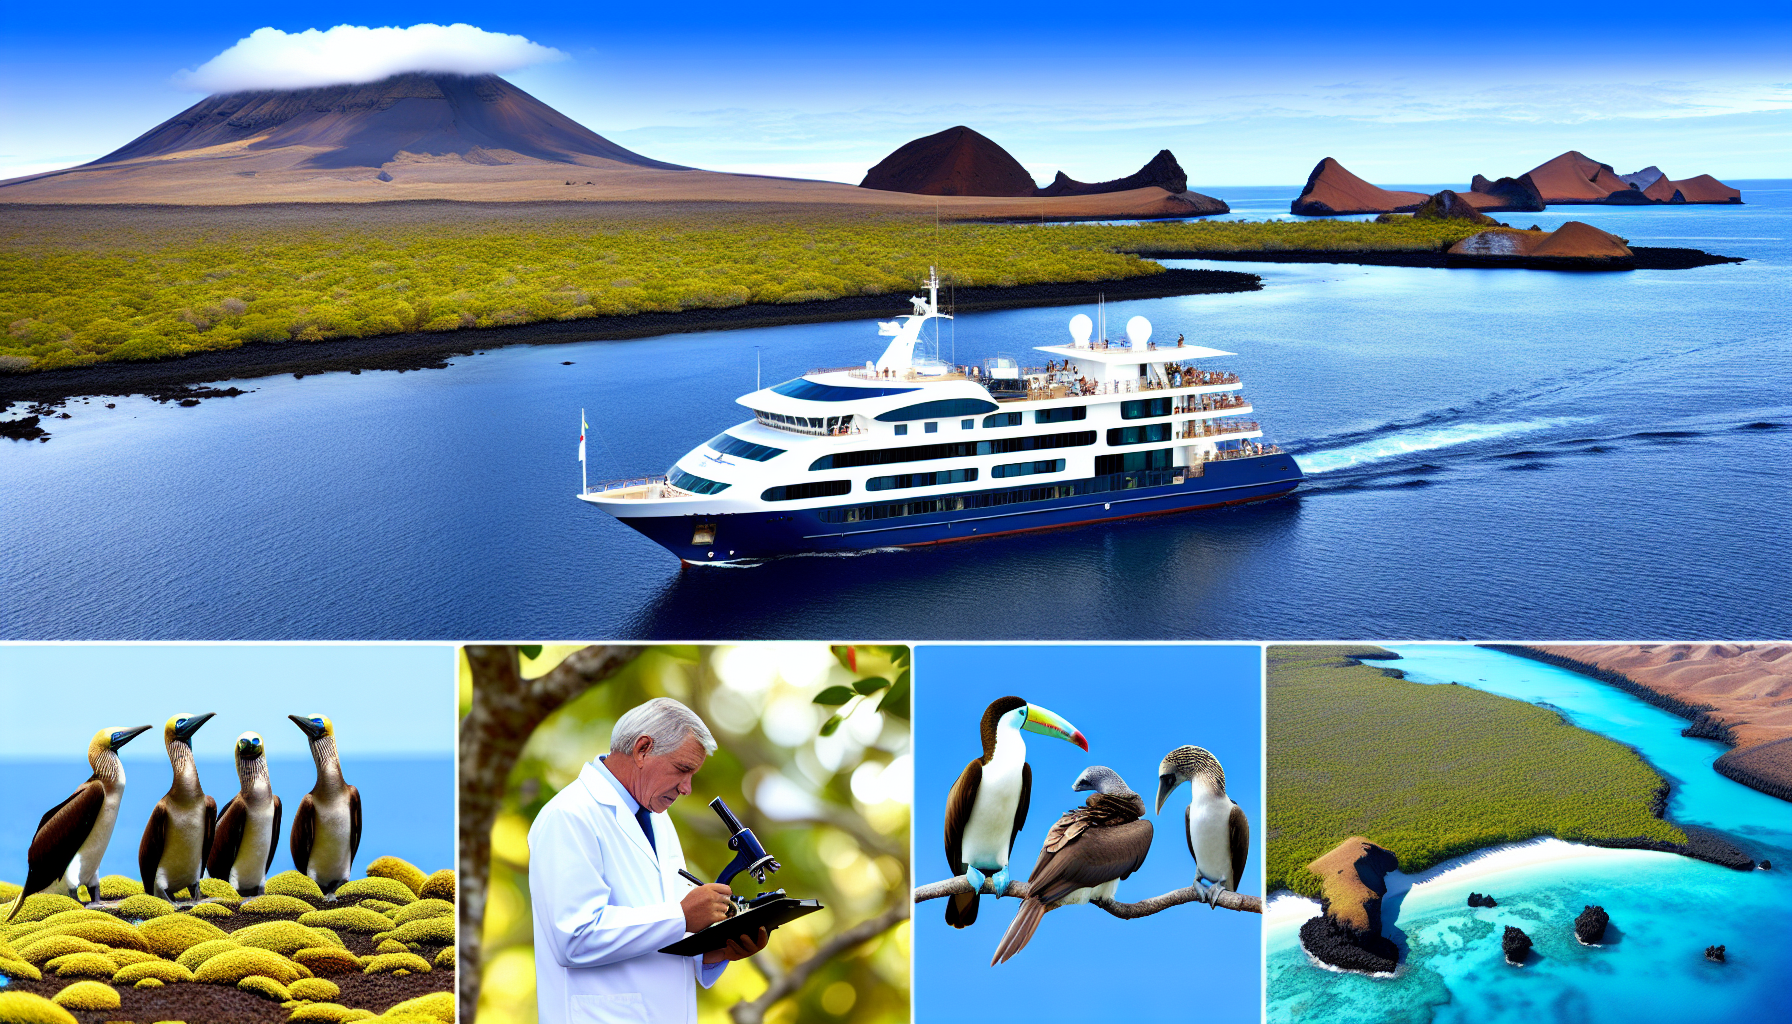 Aqua expeditions and Charles Darwin foundation: shaping the future of sustainable tourism in the Galápagos Islands